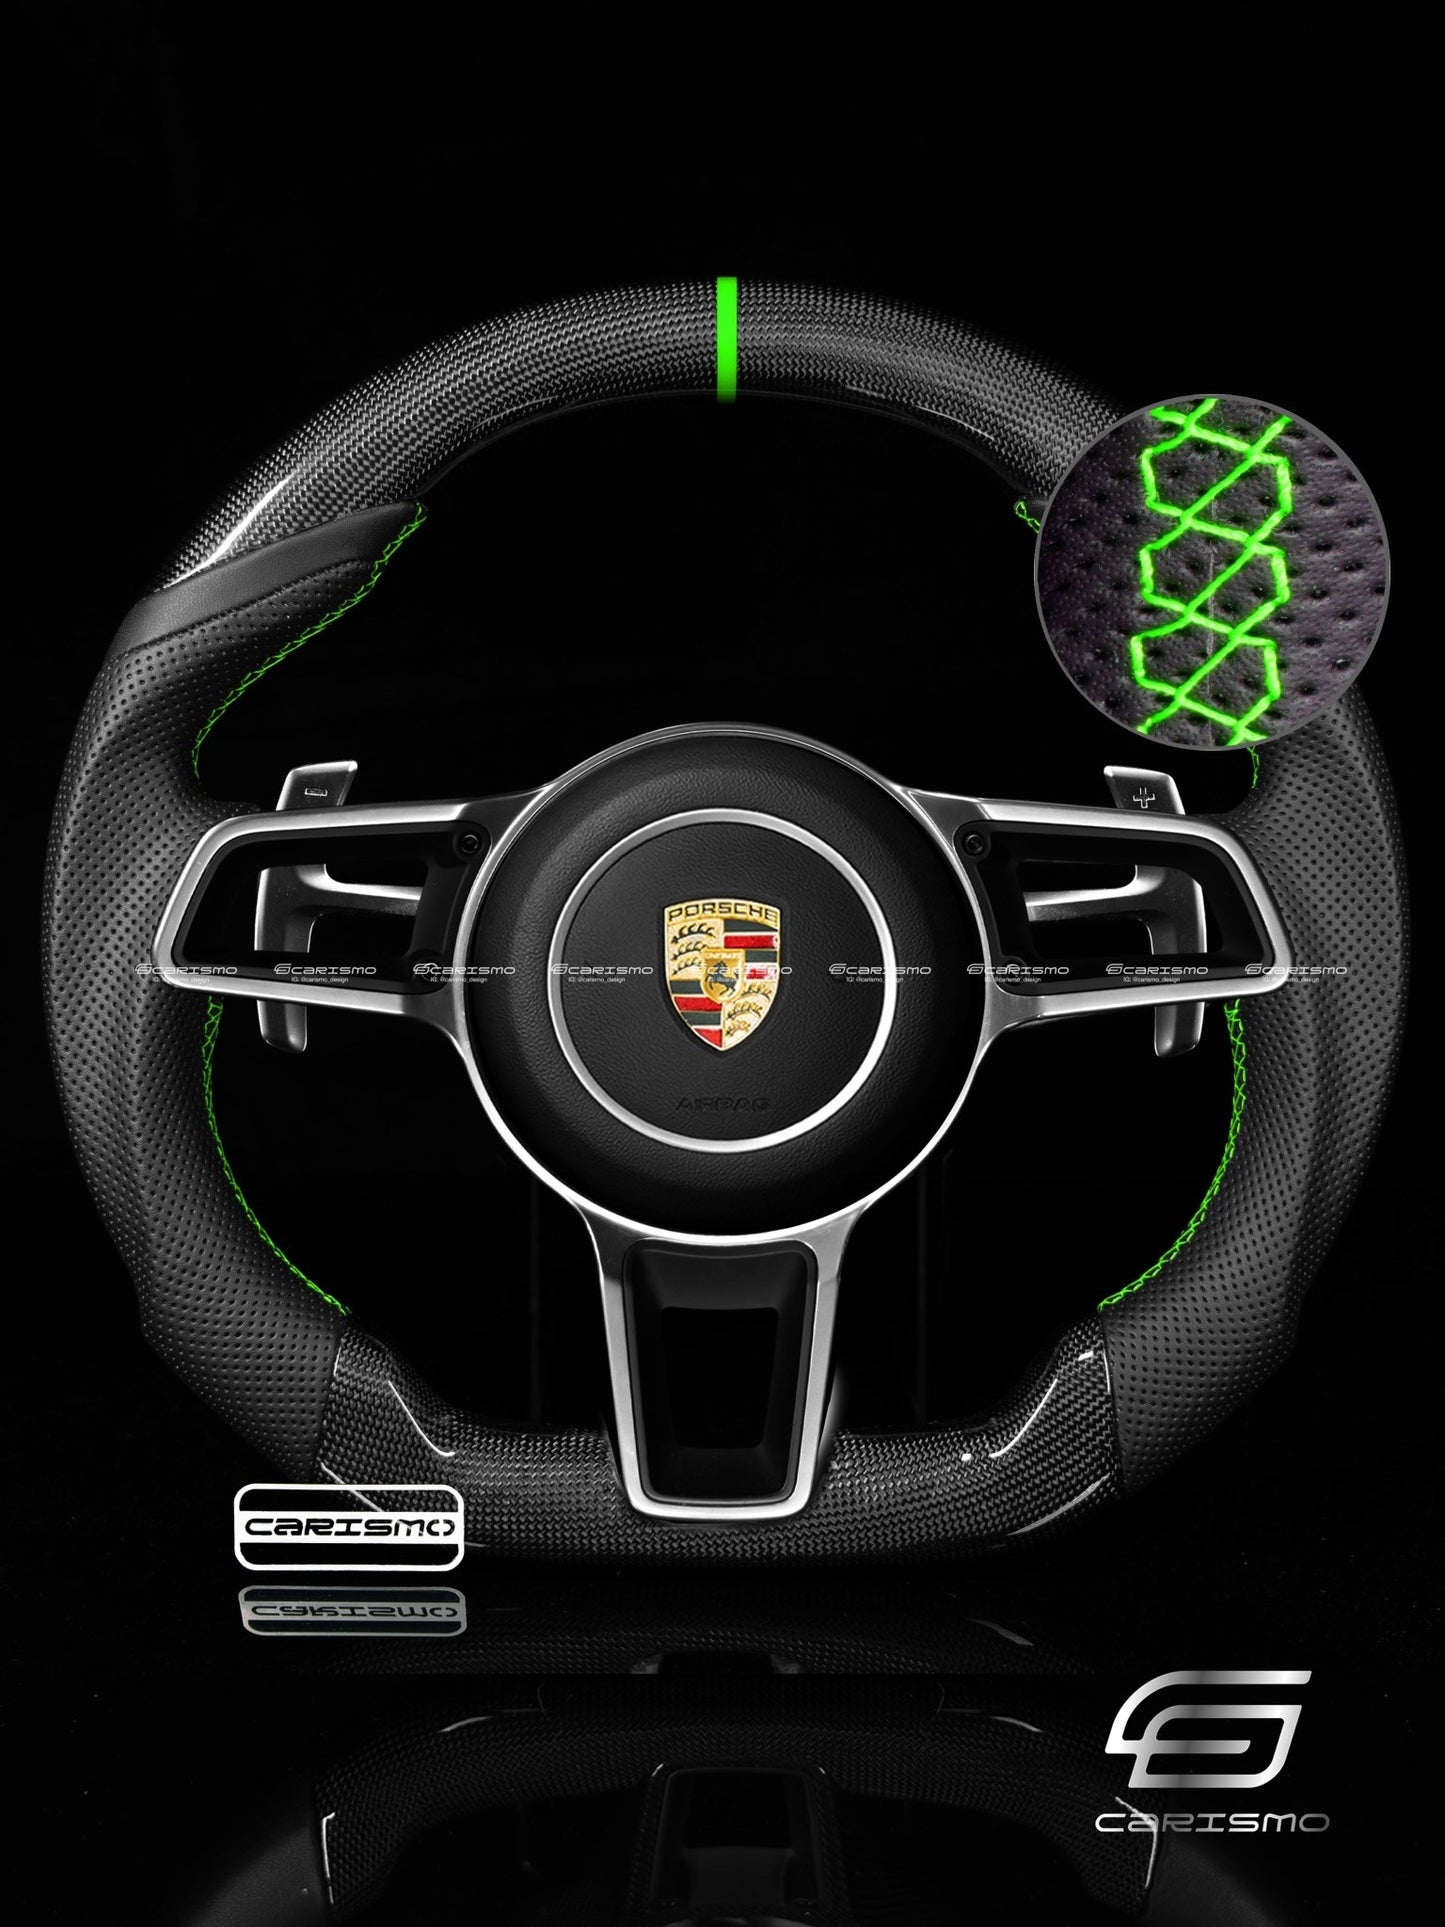 Carismo Steering Wheel For Porsche 911 (991.2 with Dials) - Sport - Gloss Plain Carbon - Perforated Leather - Carismo